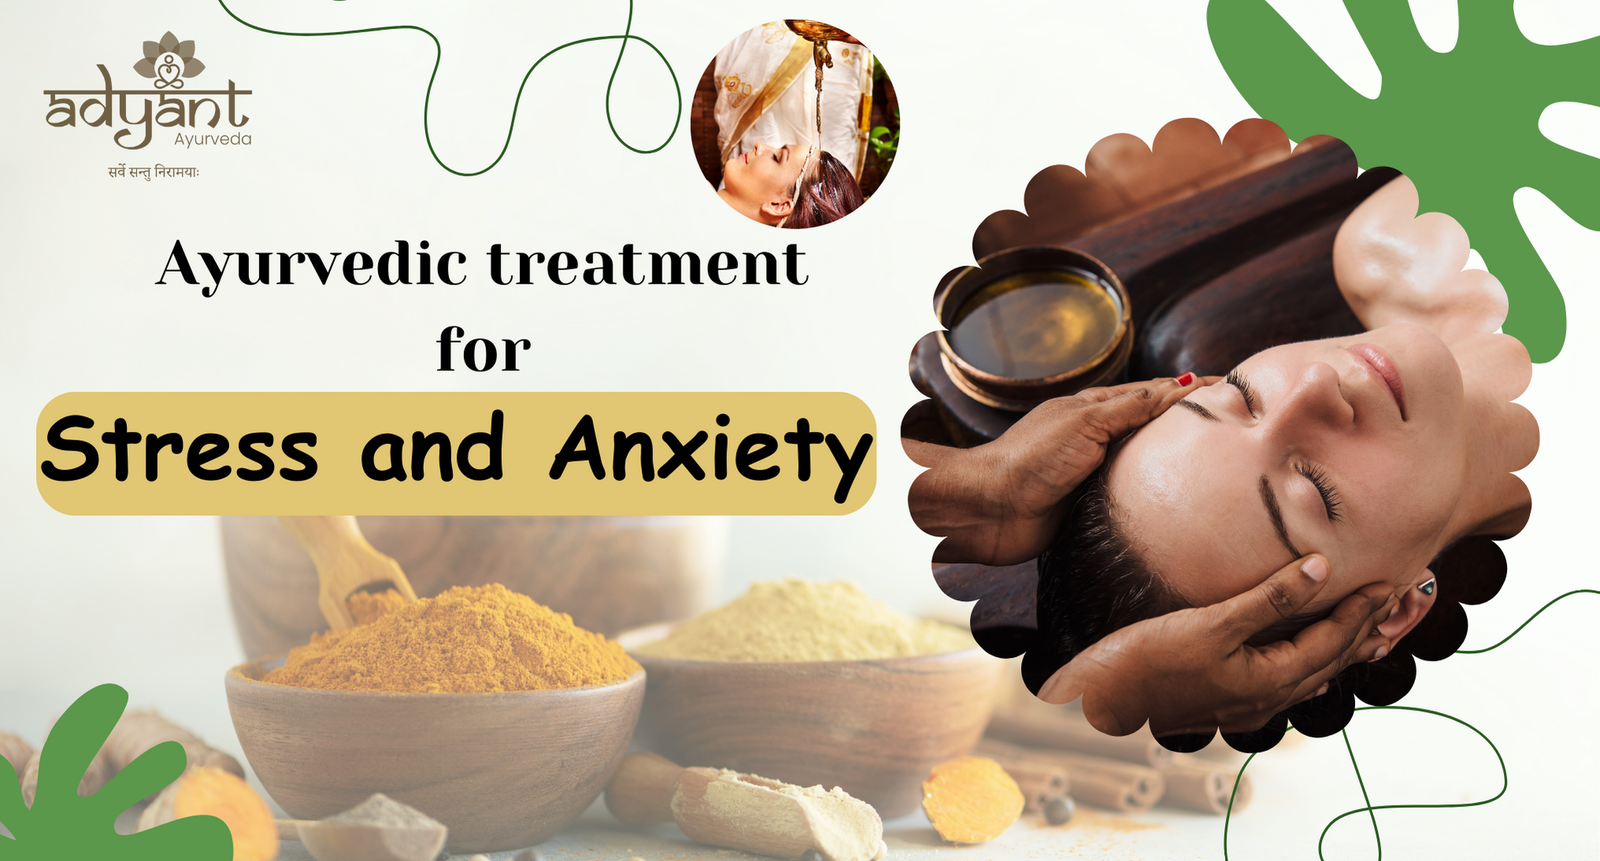 Ayurvedic Treatment for Anxiety and Stress: Therapies & Remedies & Diet